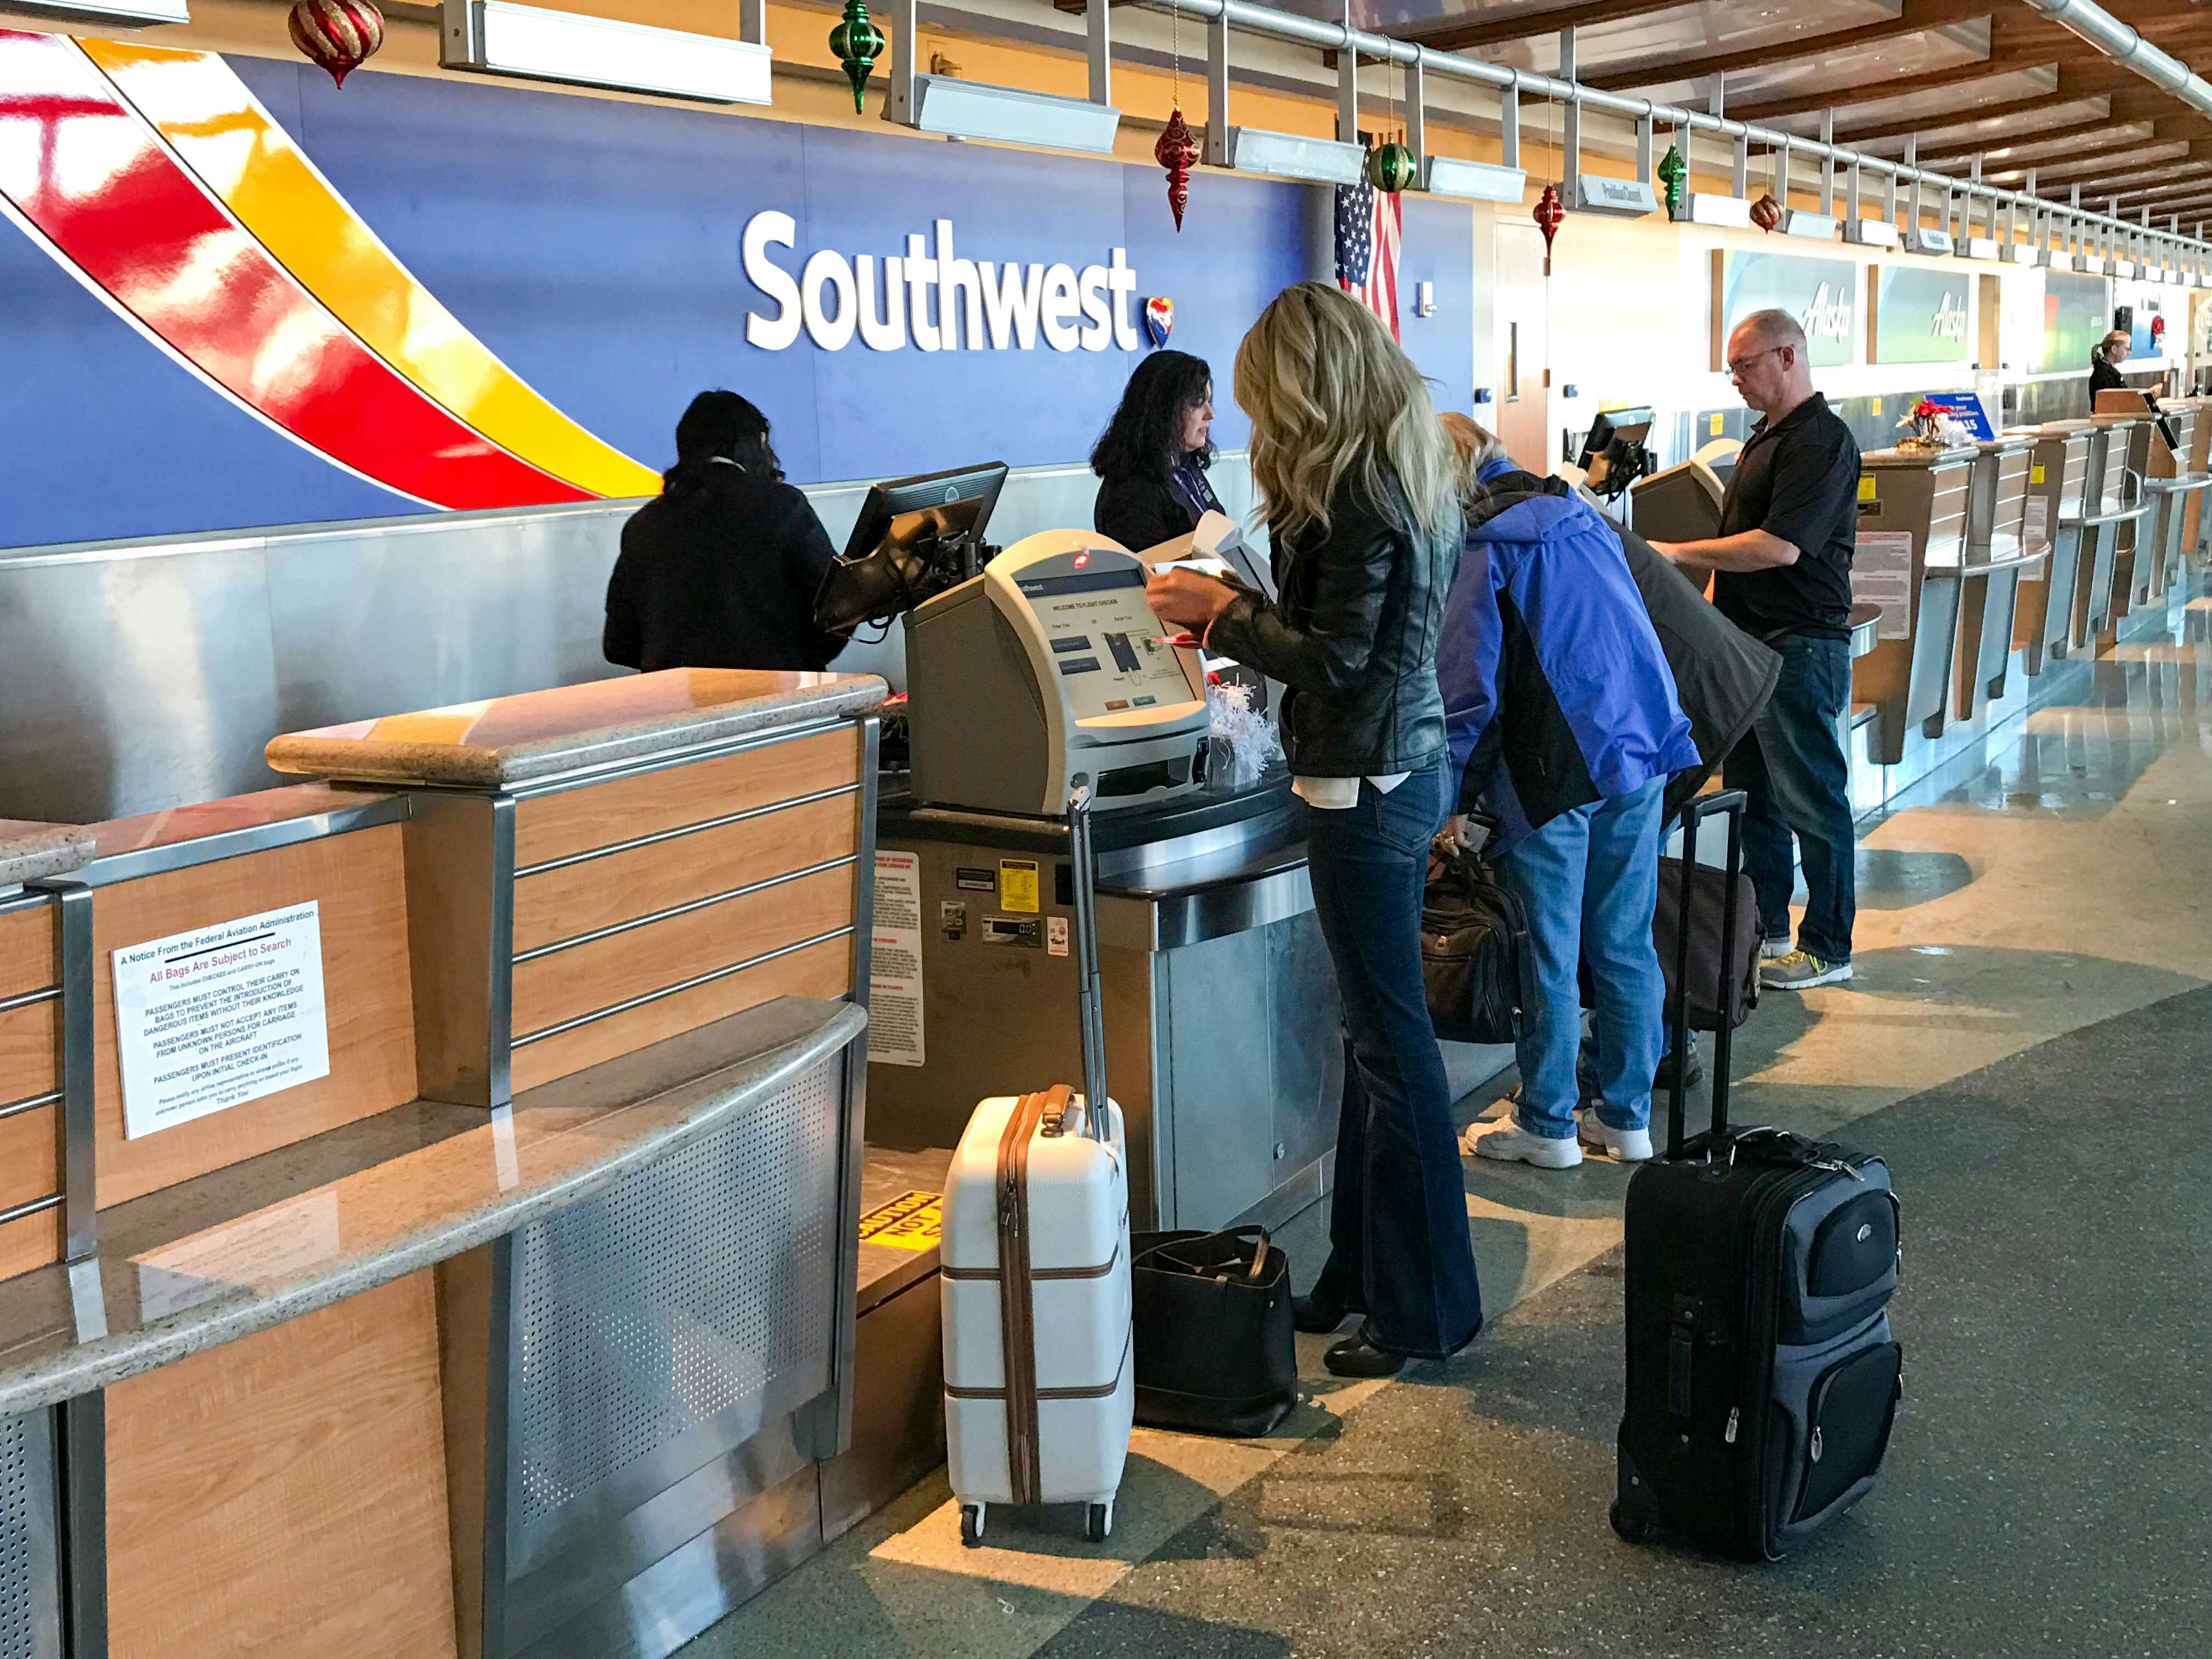 A woman standing at a Southwest counter in an airport.